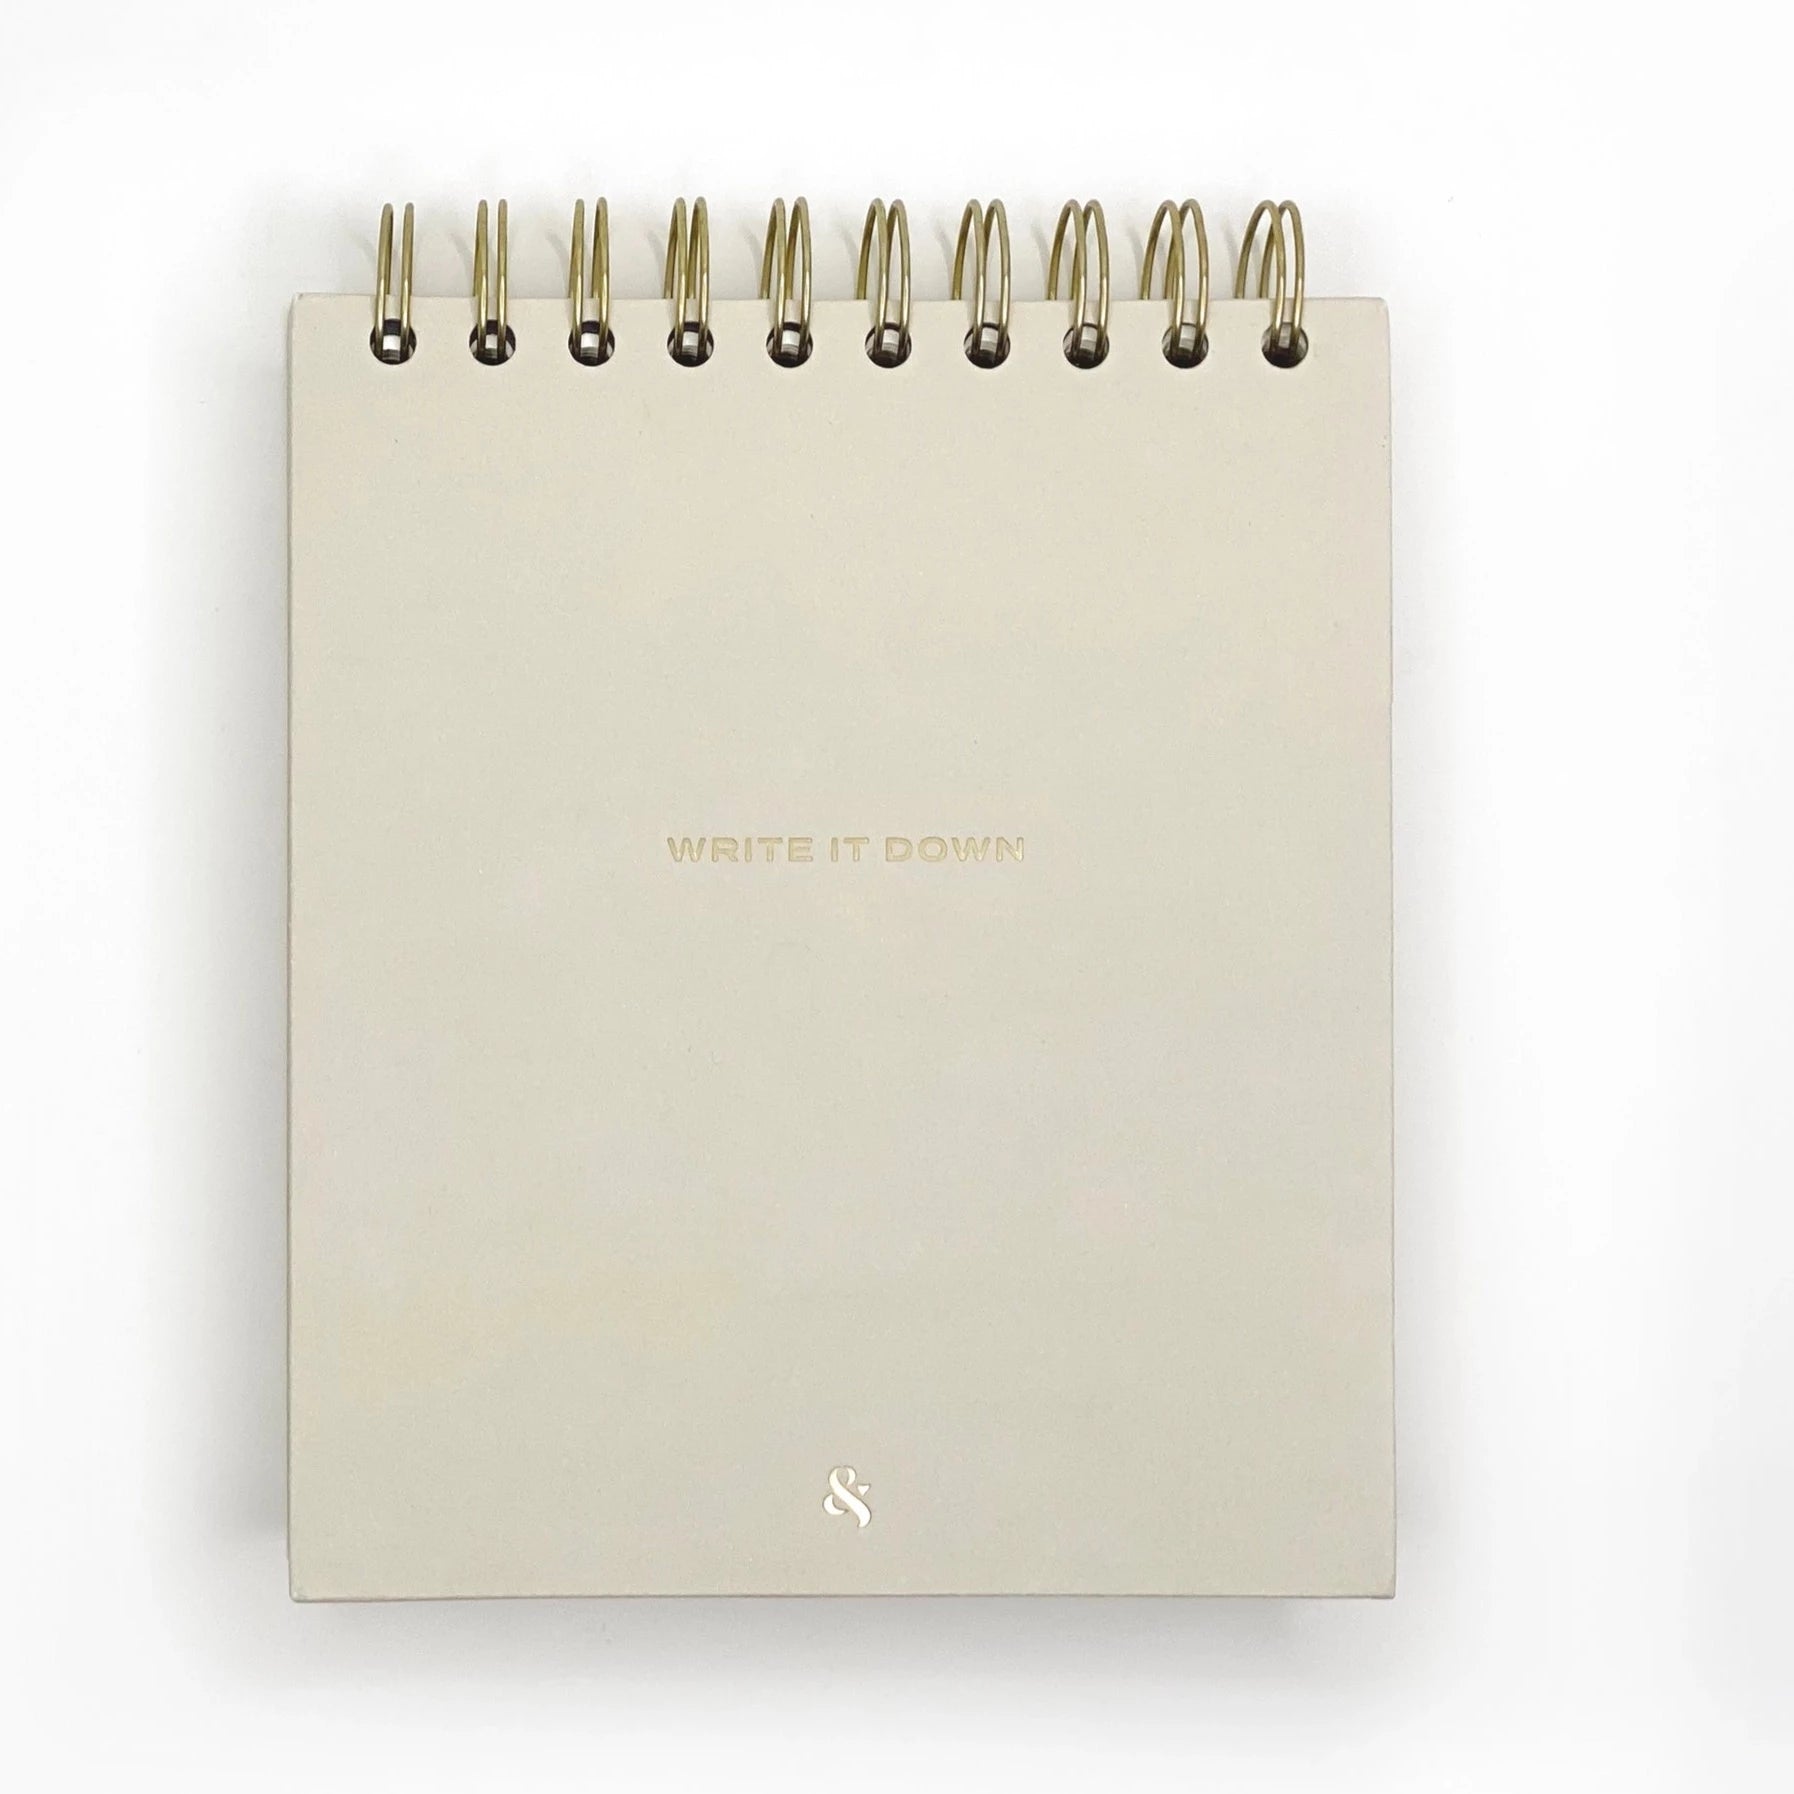 creme mini notepad with gold spiral bound at the top. on the cover it says"write it down"